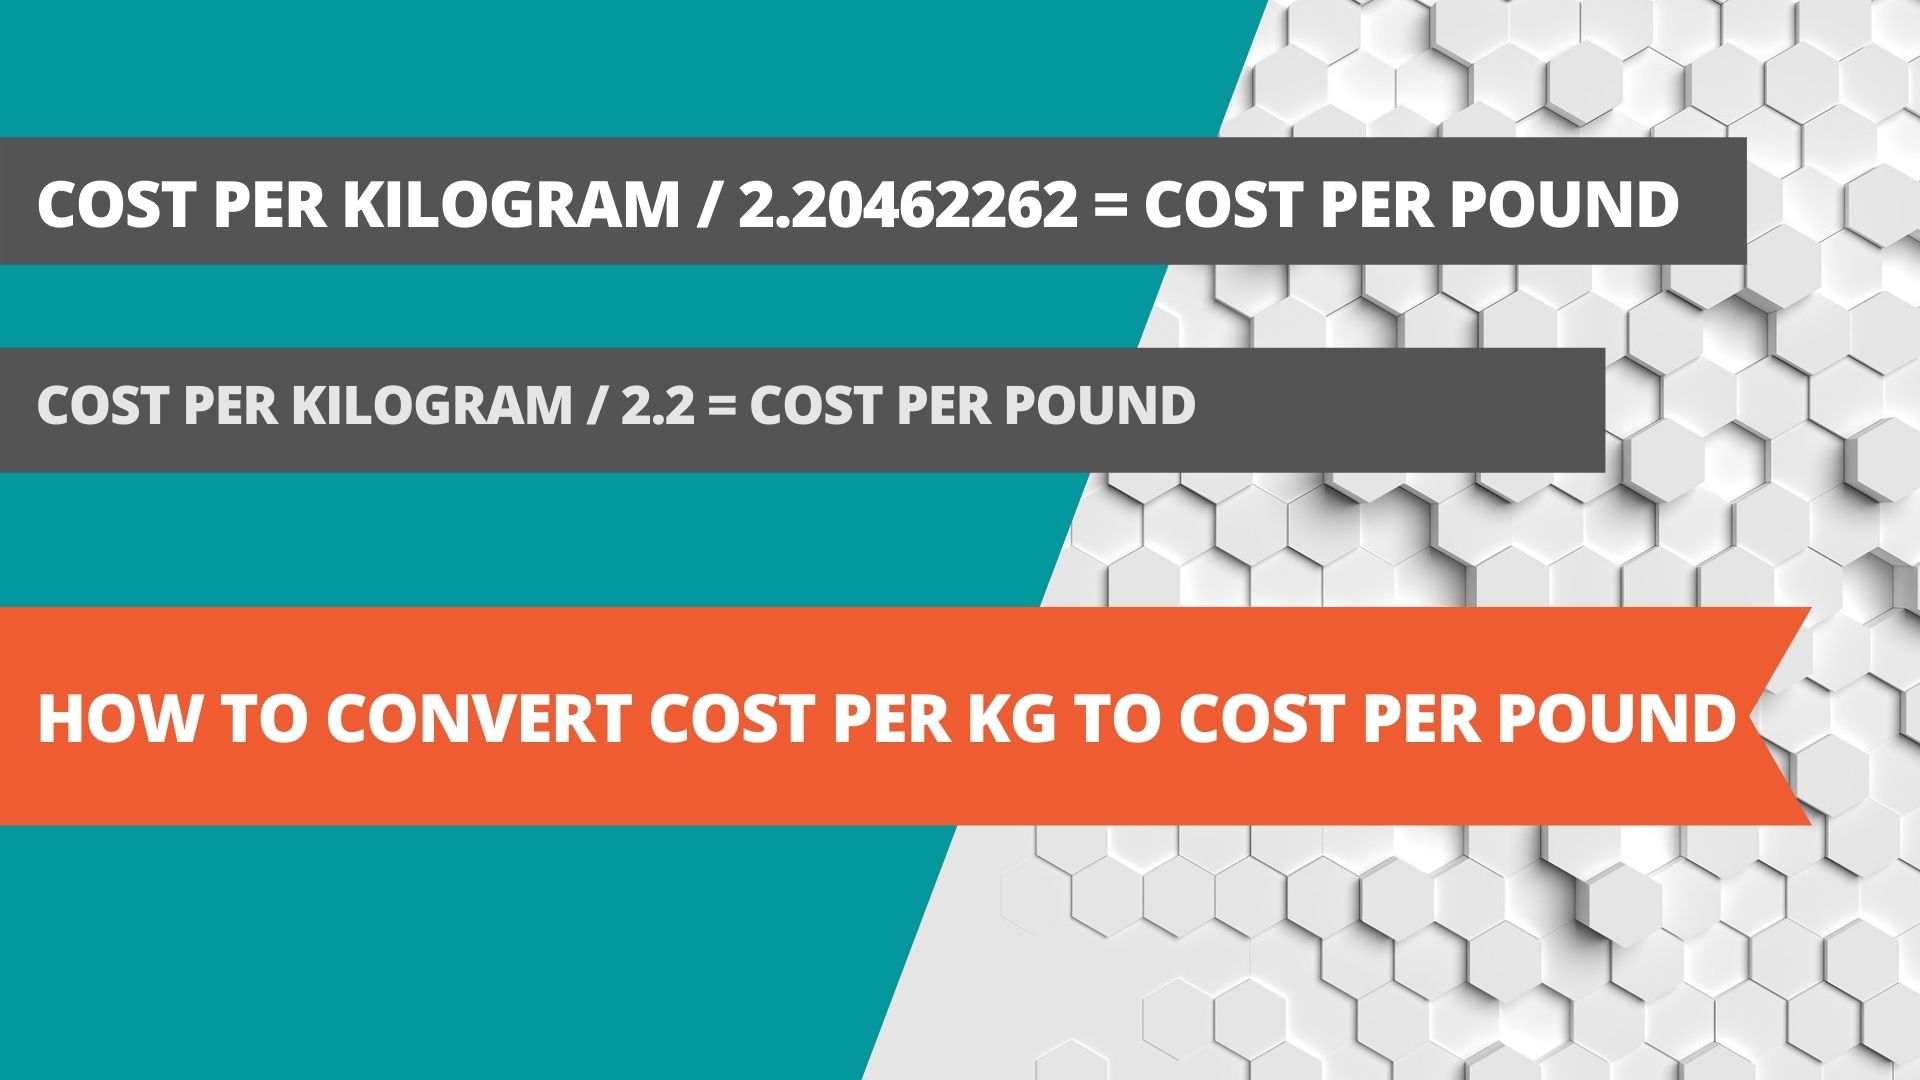 How to Convert Cost Per Kg to Cost Per Pound